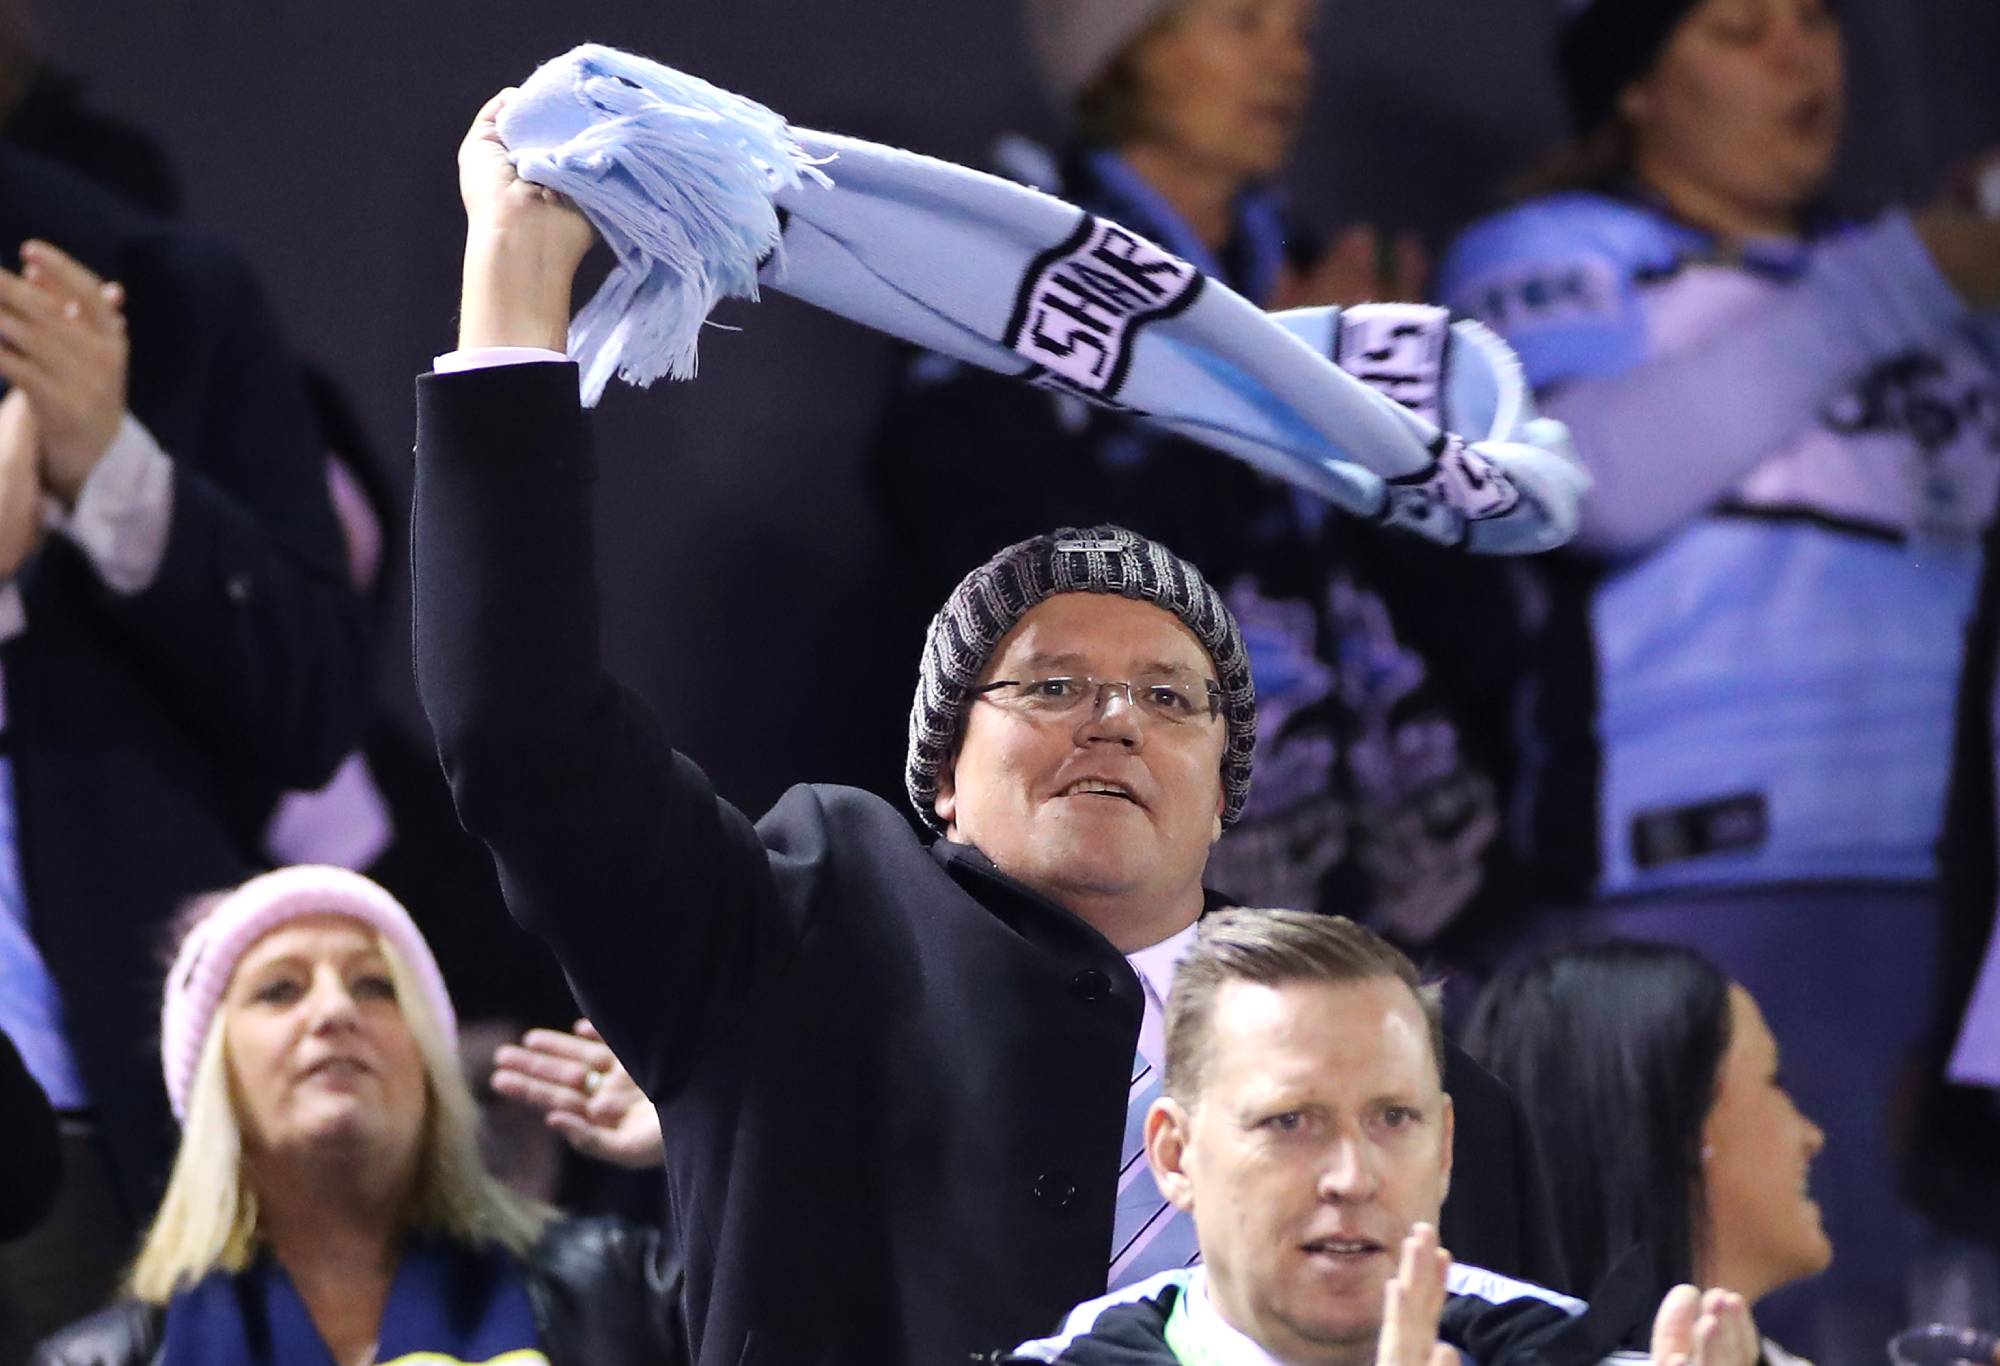 Scott Morrison at a Cronulla NRL game at Shark Park, Australia. (Photo by Cameron Spencer/Getty Images)